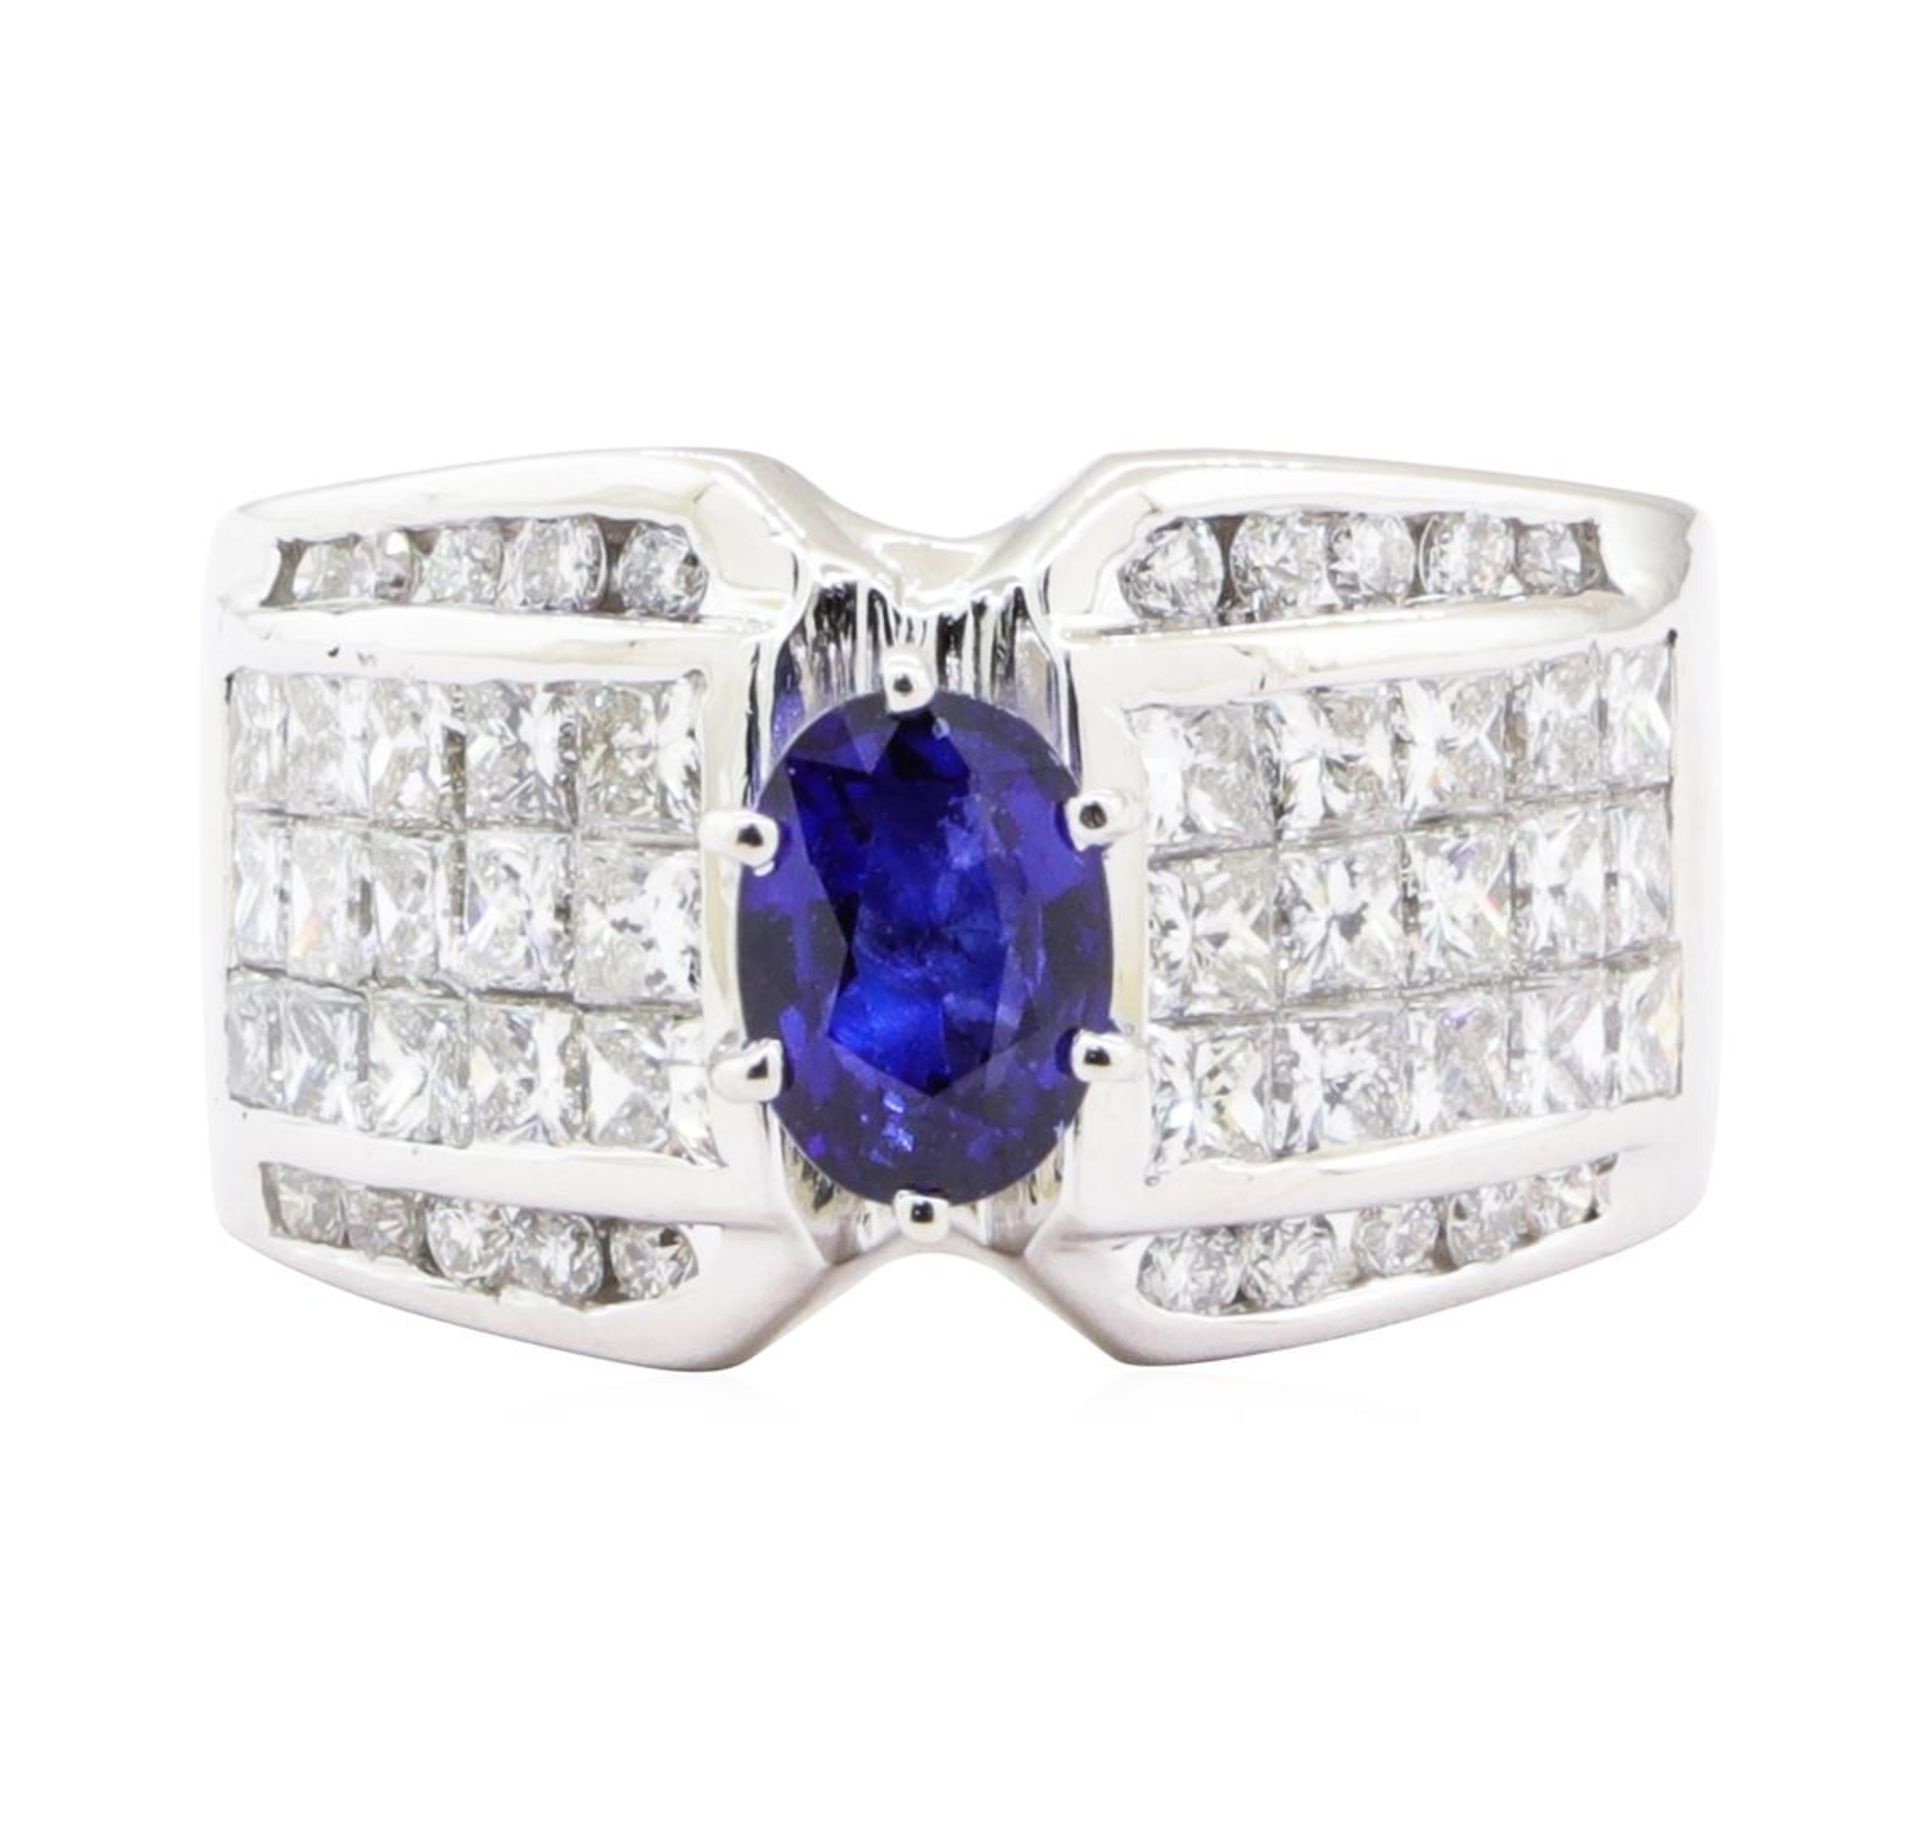 3.43 ctw Sapphire And Diamond Ring - 18KT White Gold - Image 2 of 5